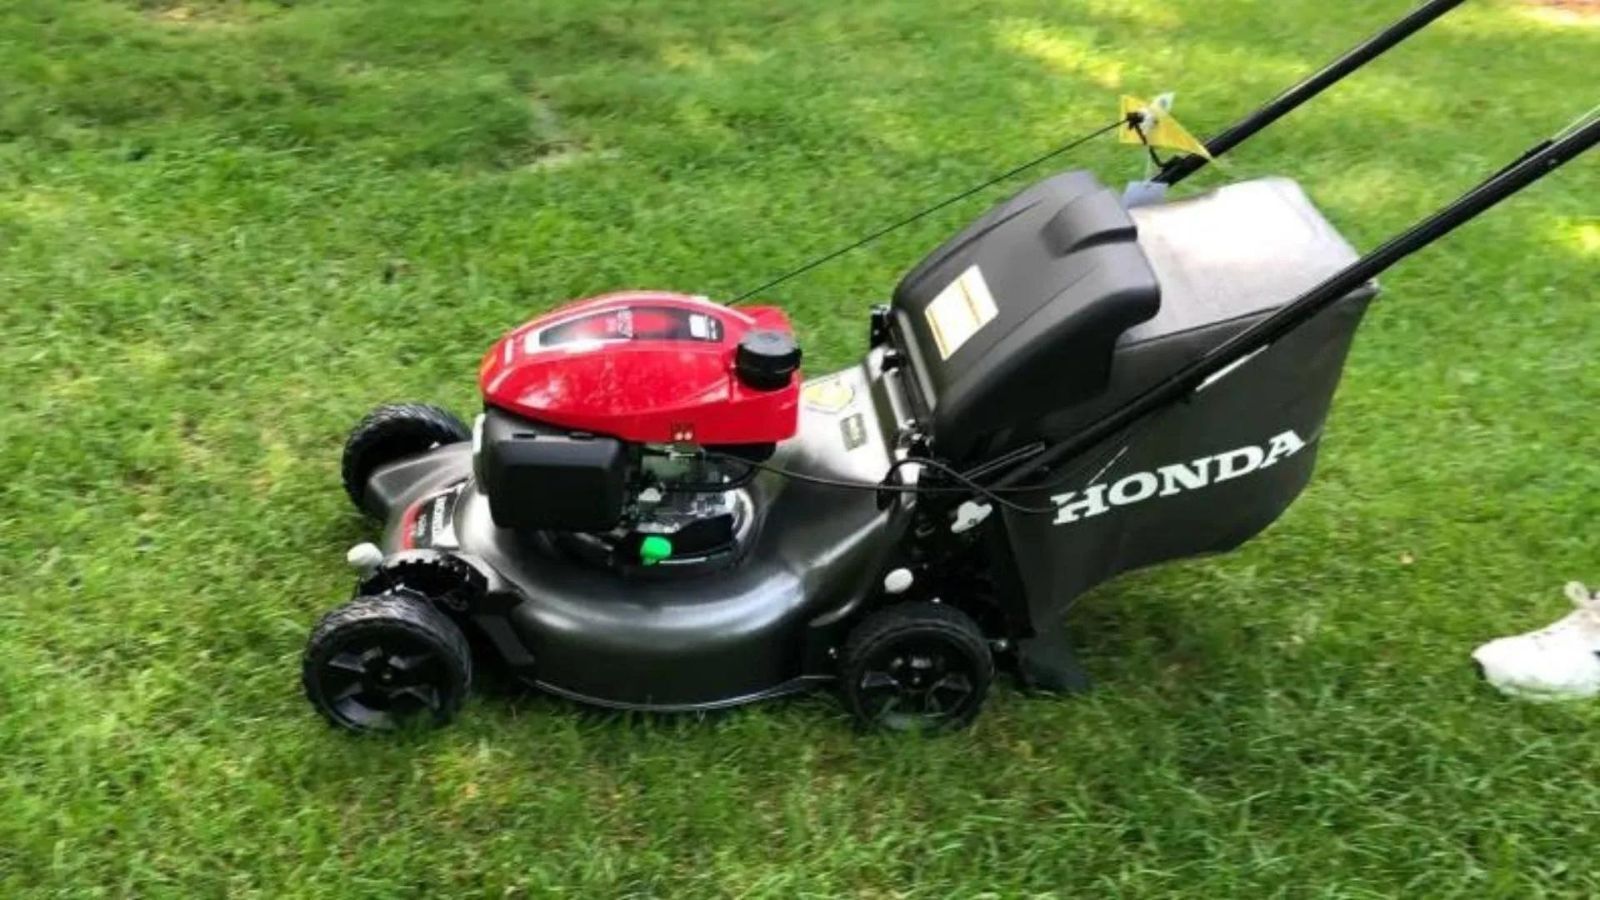 Honda Mower Self Propelled Slow (Why + How to Fix)